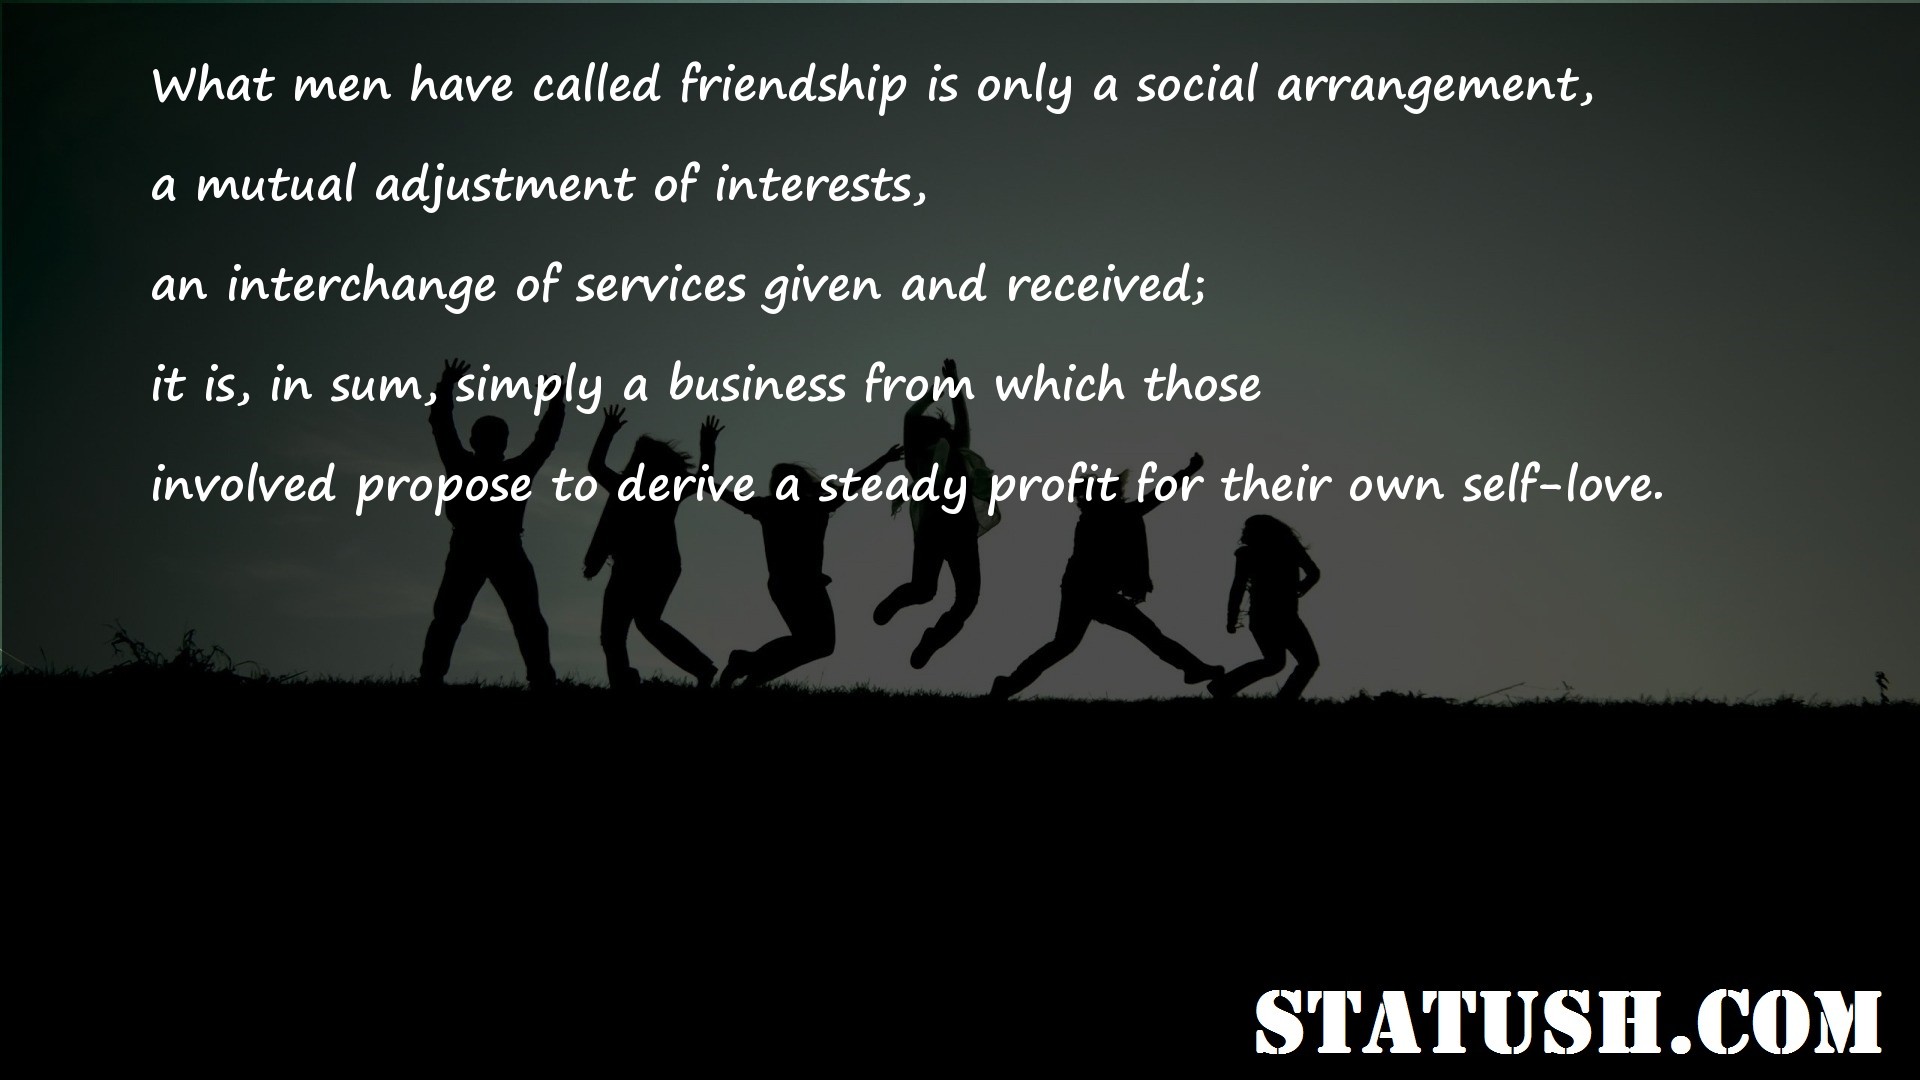 What men have called friendship is only a social arrangement Friendship Quotes at statush.com